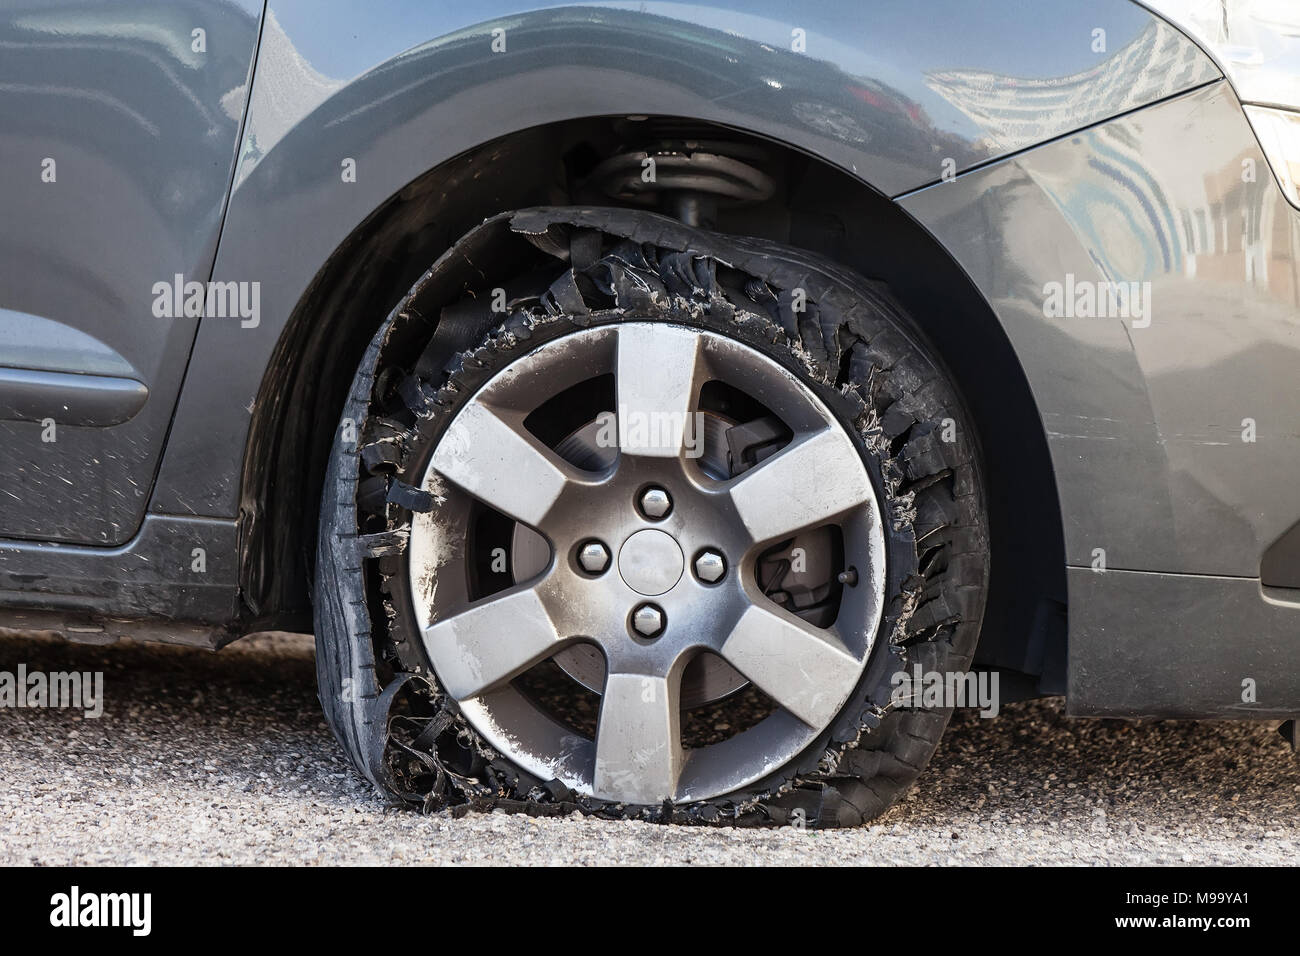 Destroyed blown out tire with exploded, shredded and damaged rubber on a modern suv automobile. Flat low profile tyre on an alloy rim, ripped open Stock Photo